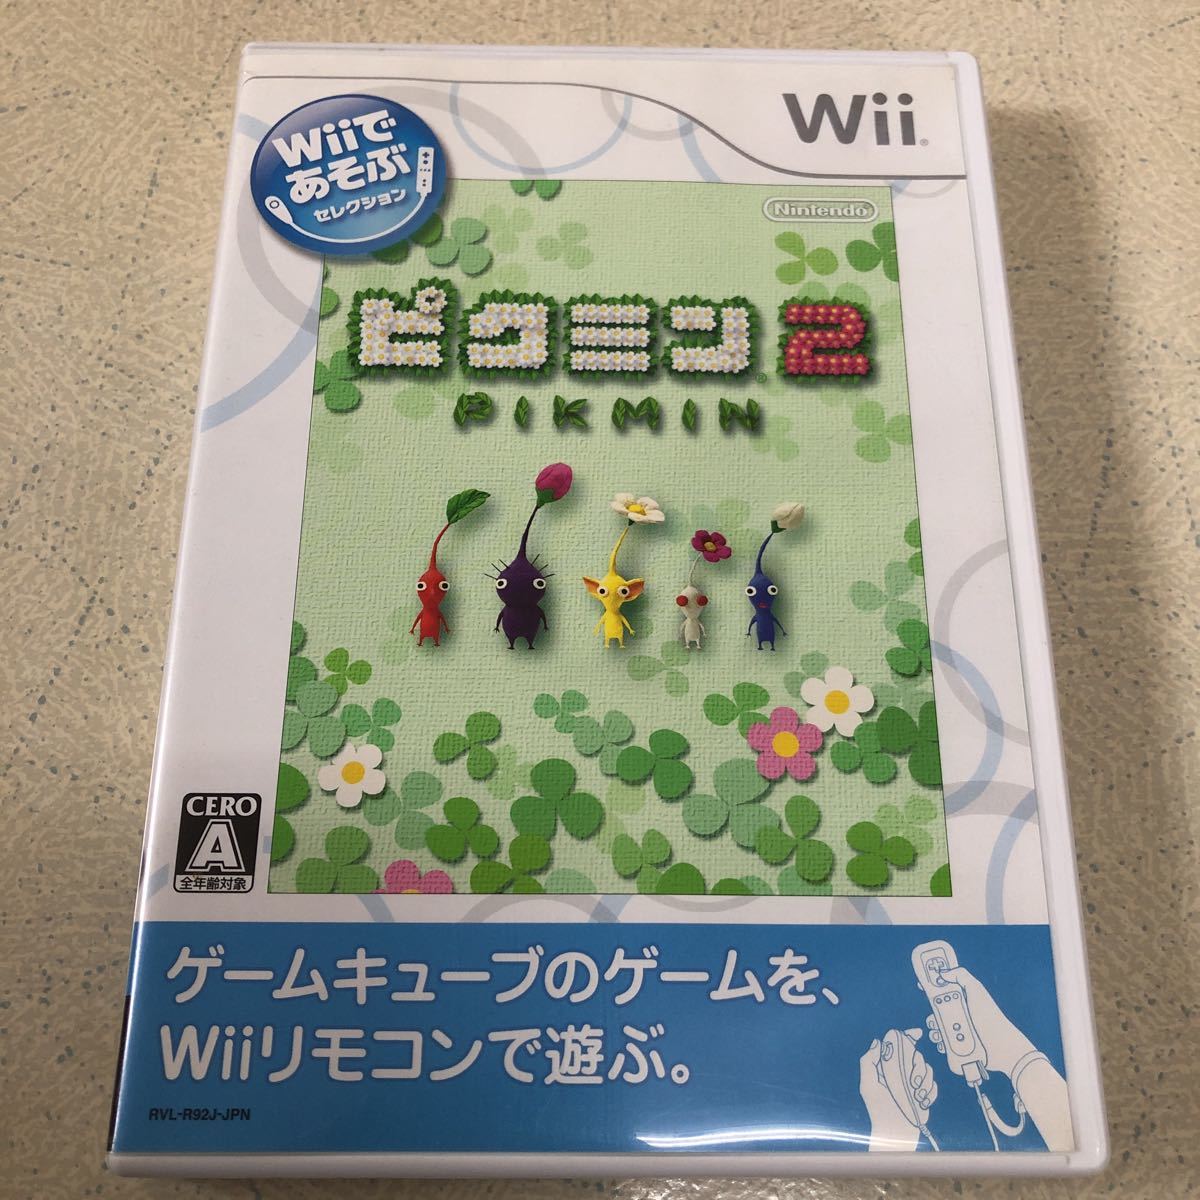 Wiiであそぶ ピクミン2 zqe3MBqGHX, Wii - editorialdismes.com